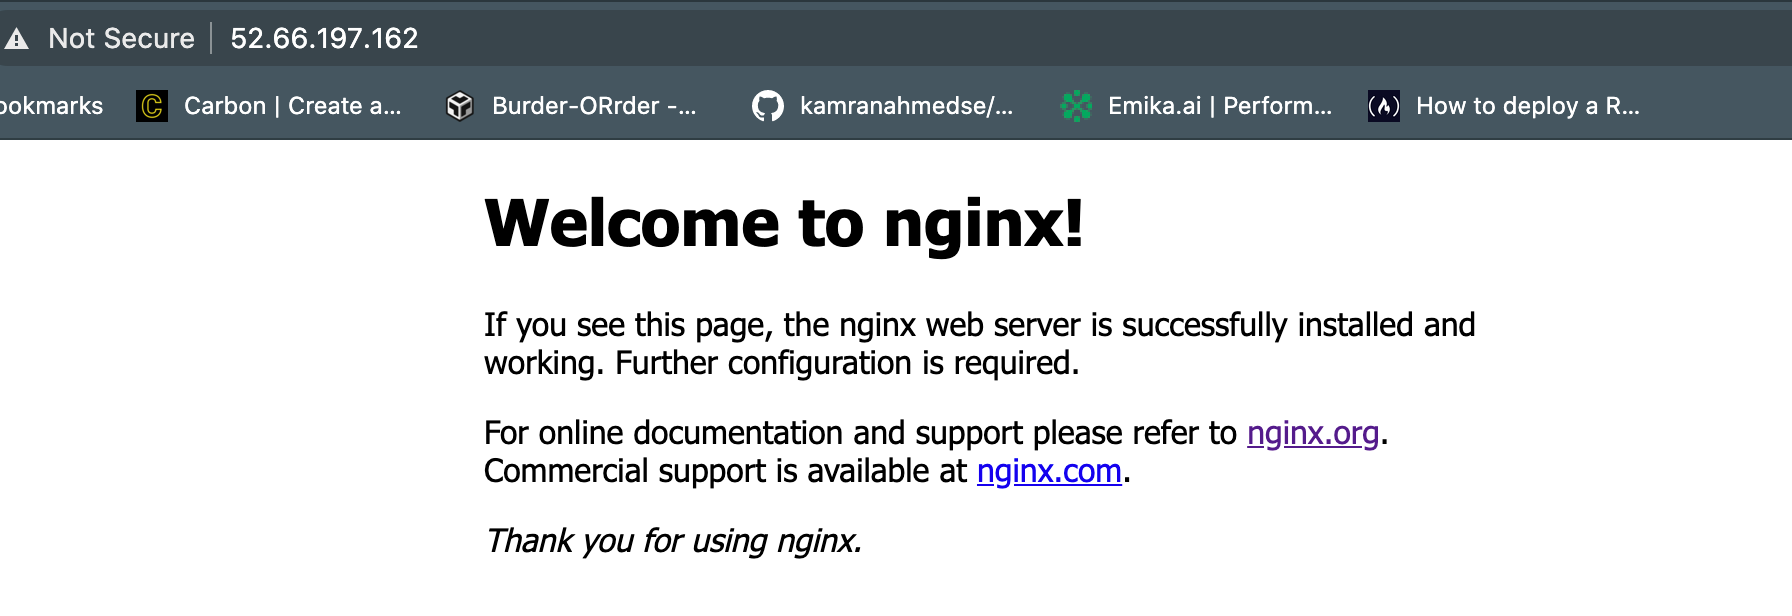 nginx is installed succesfully